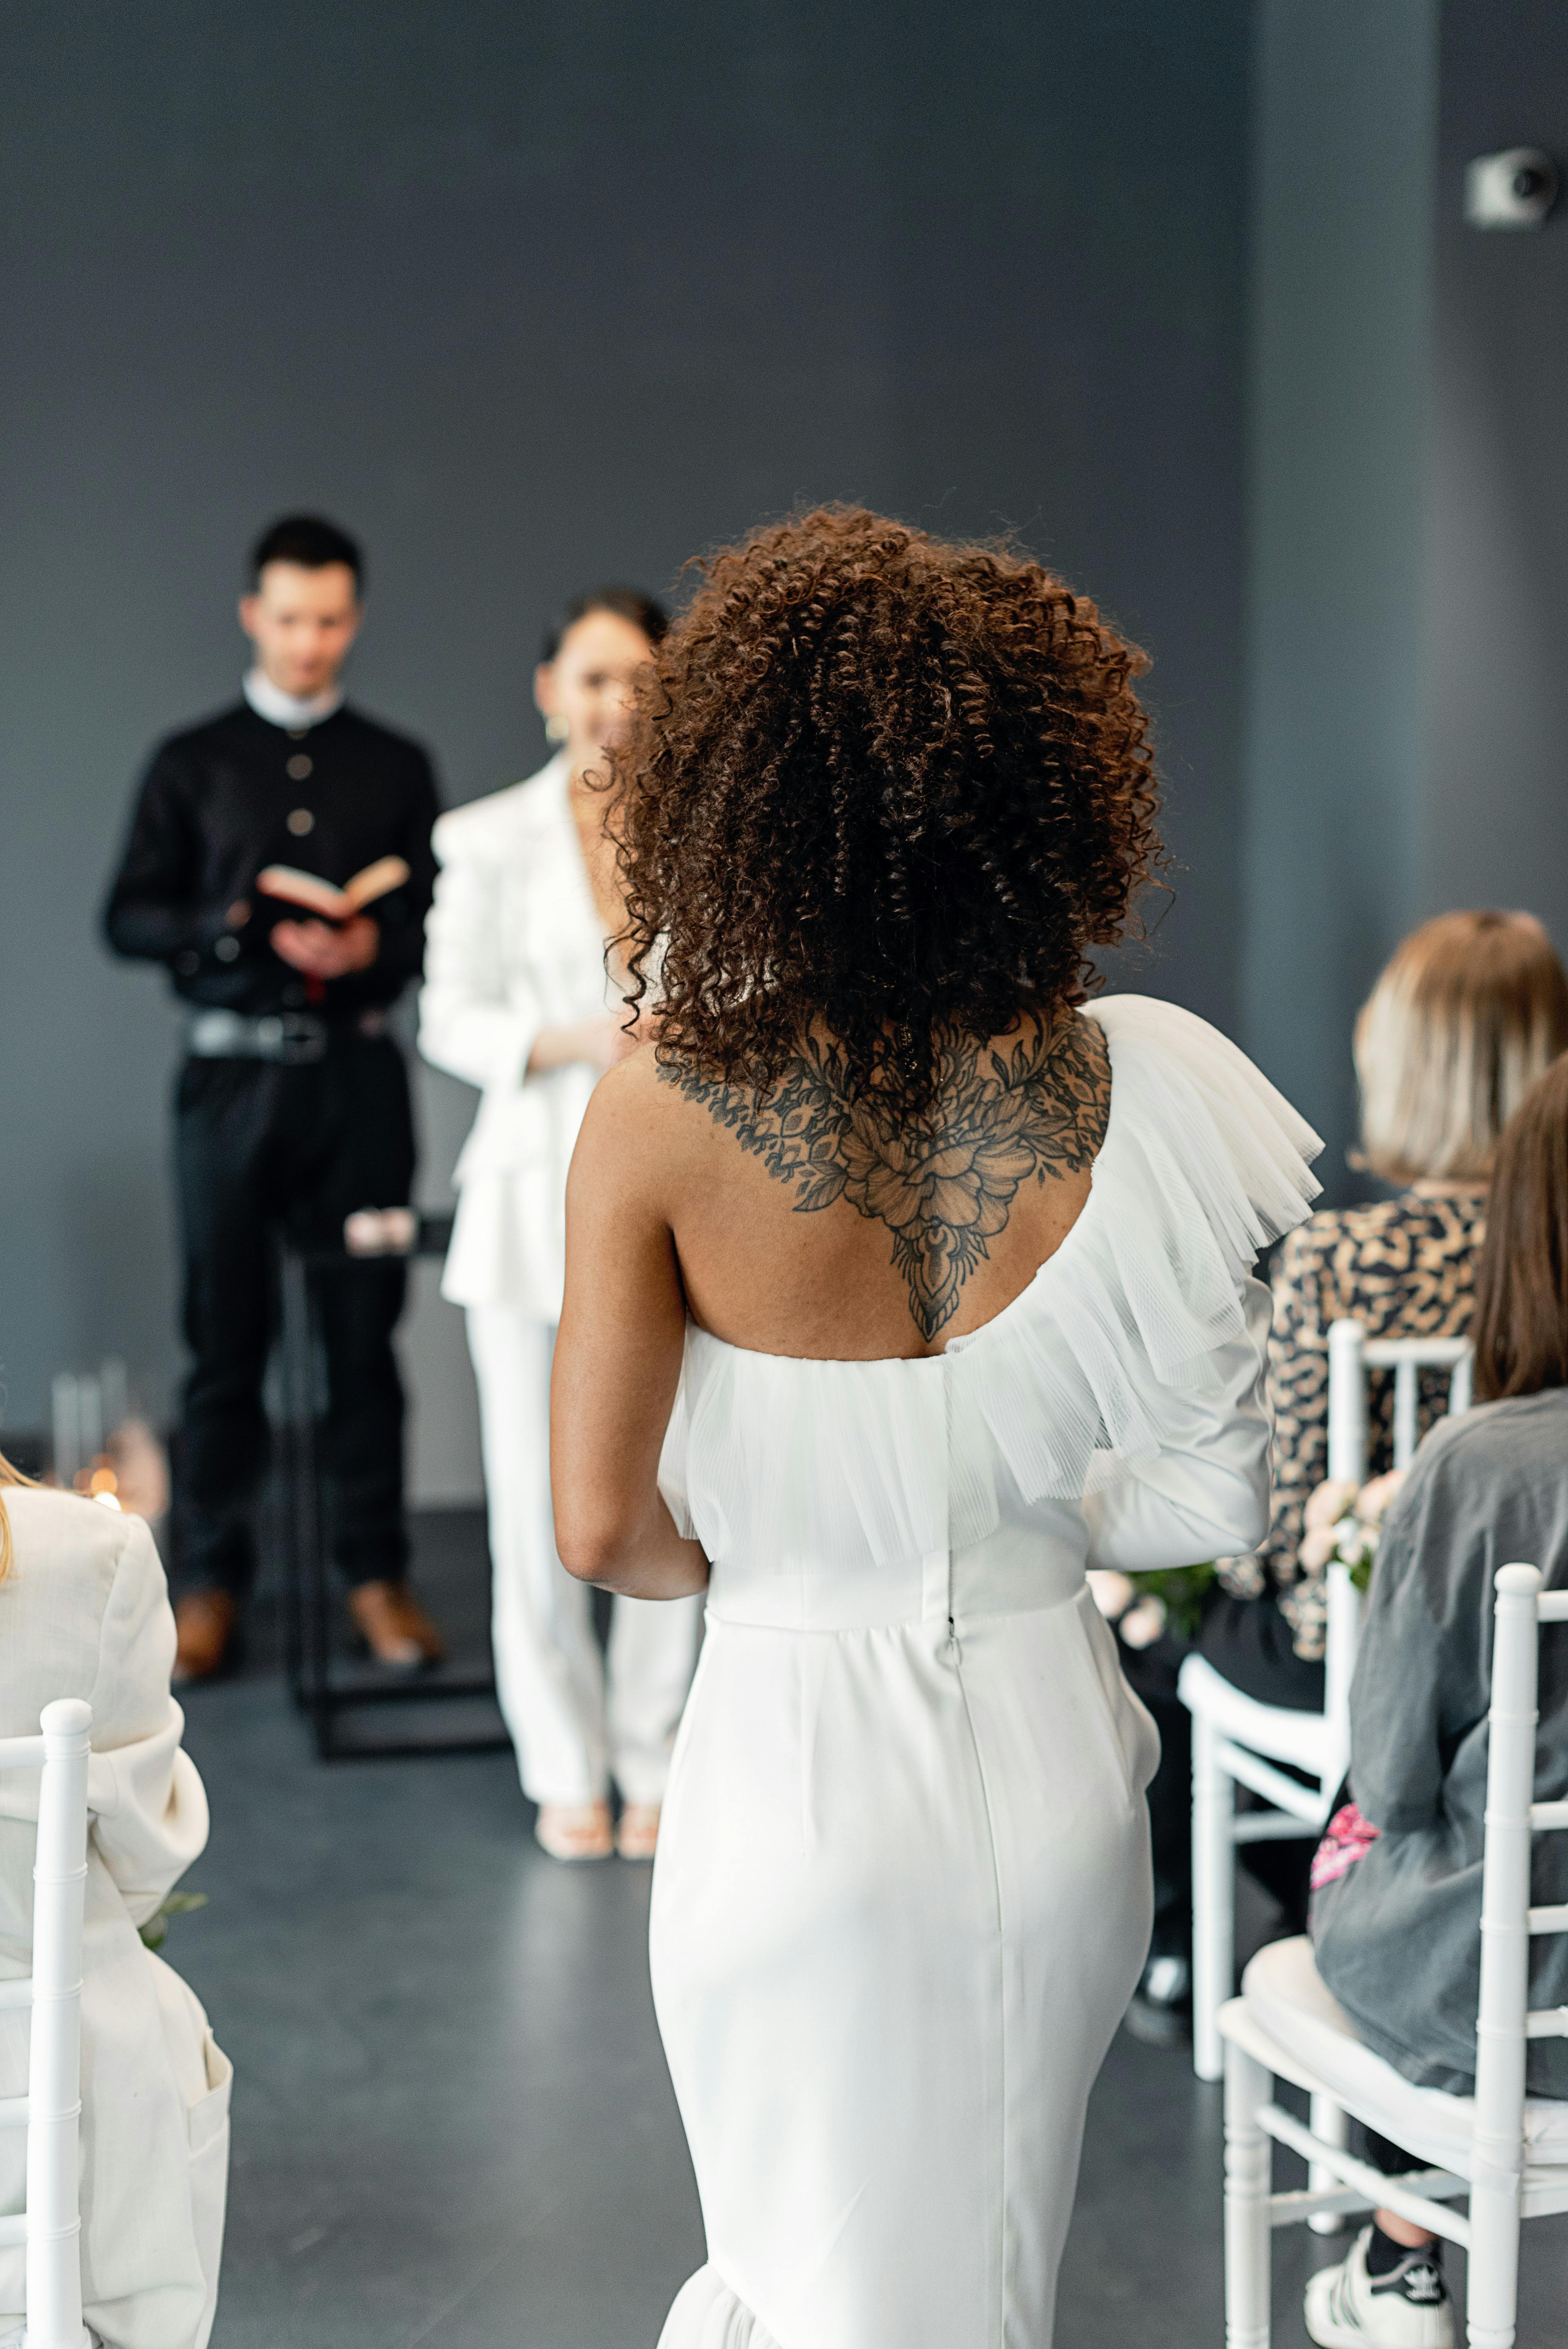 A bride walking down to the front | Source: Pexels